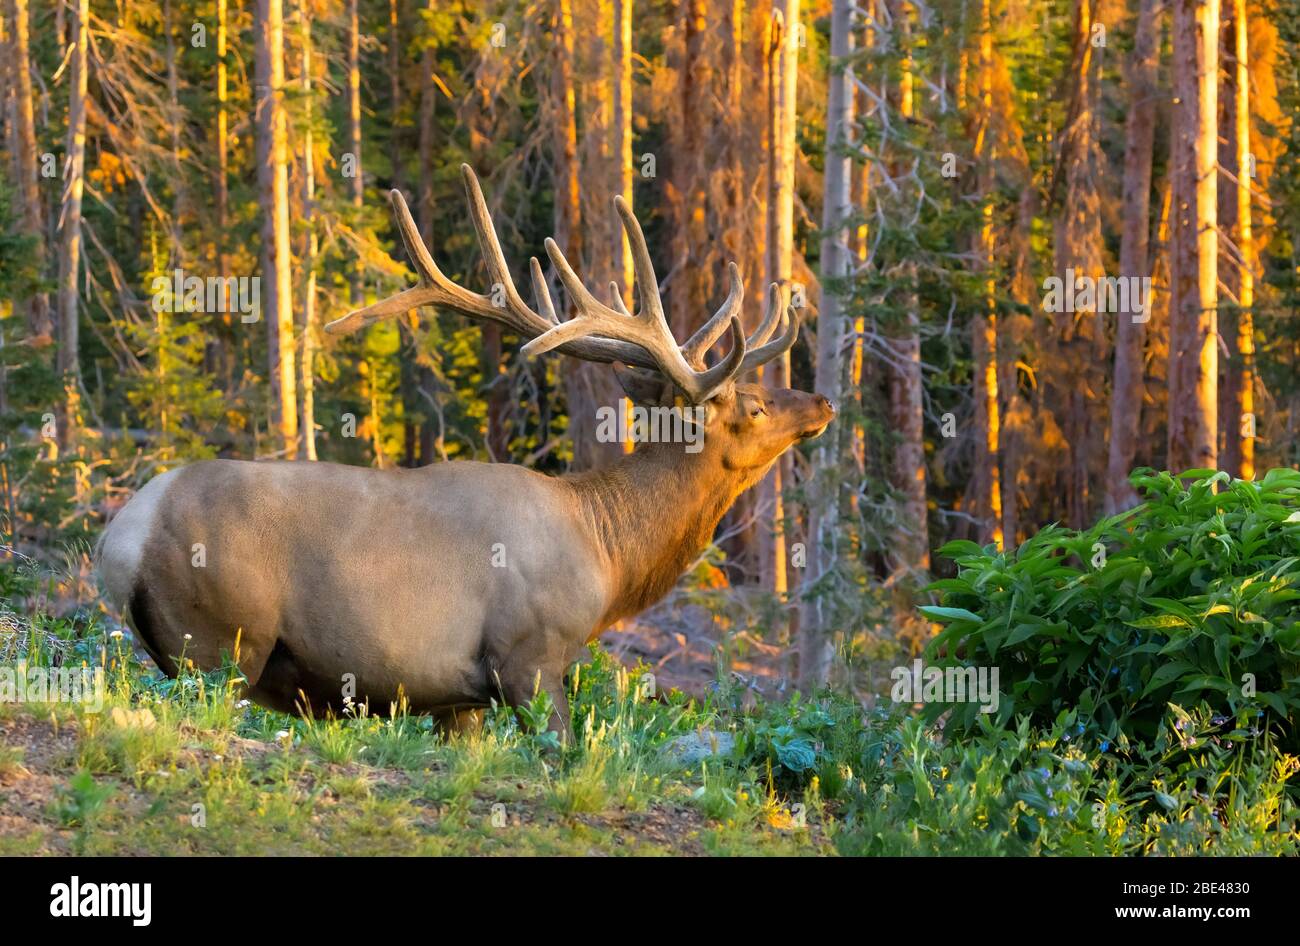 Bull elk (Cervus canadensis) standing in a forest with golden sunlight at sunset; Estes Park, Colorado, United States of America Stock Photo